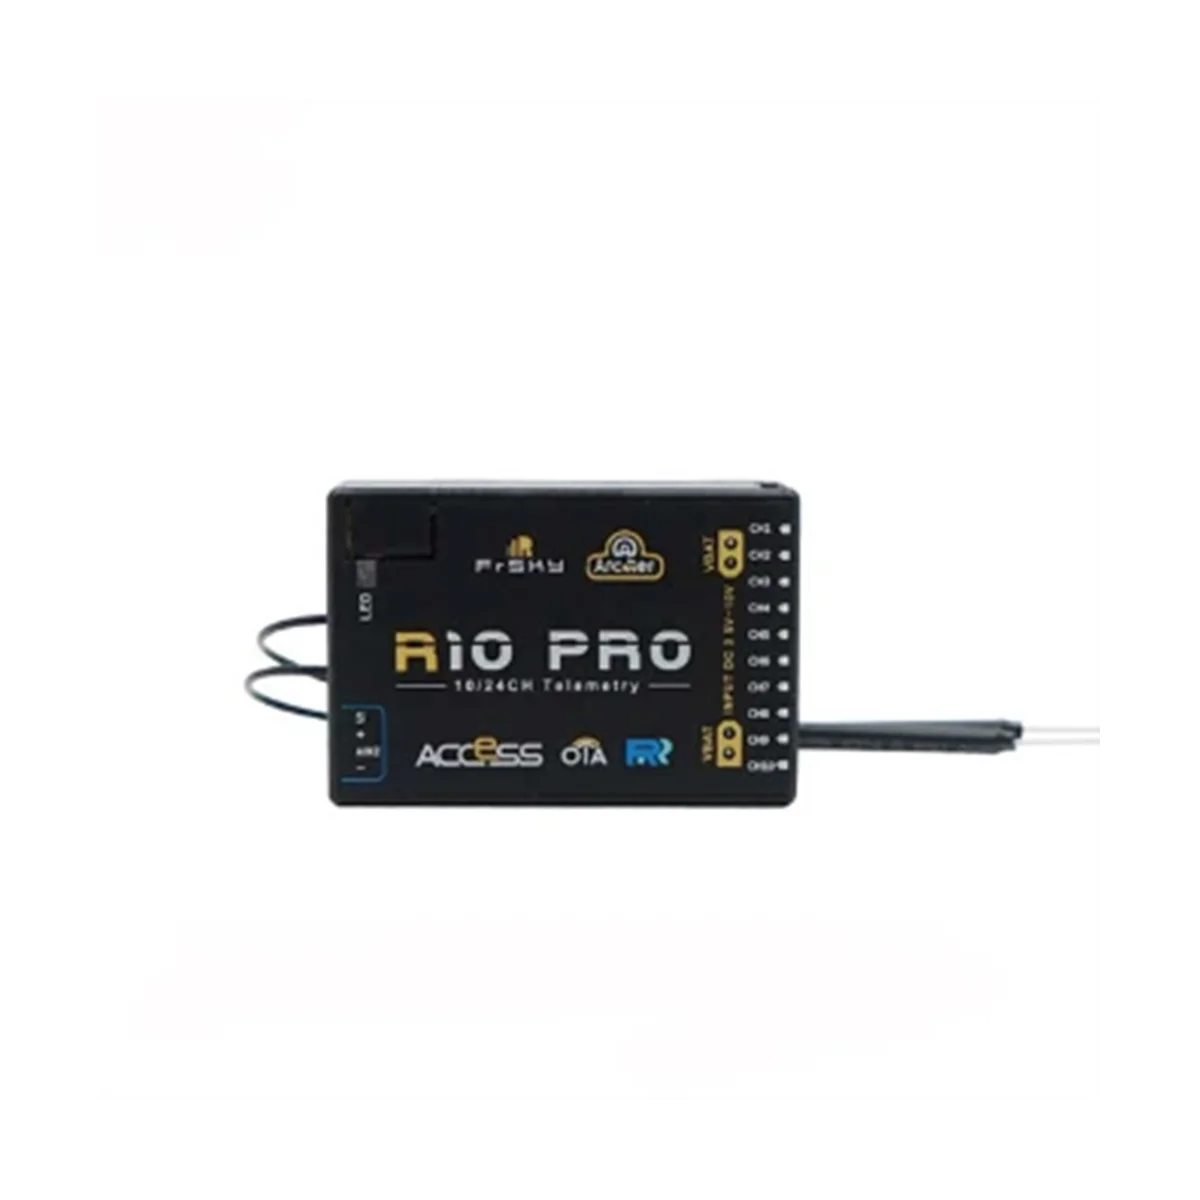 

For Instock FrSky ARCHER R10 Pro OTA 2.4G 10/24CH ACCESS S.Port F.Port PWM SBUS Telemetry Receiver for RC Drone Airplane